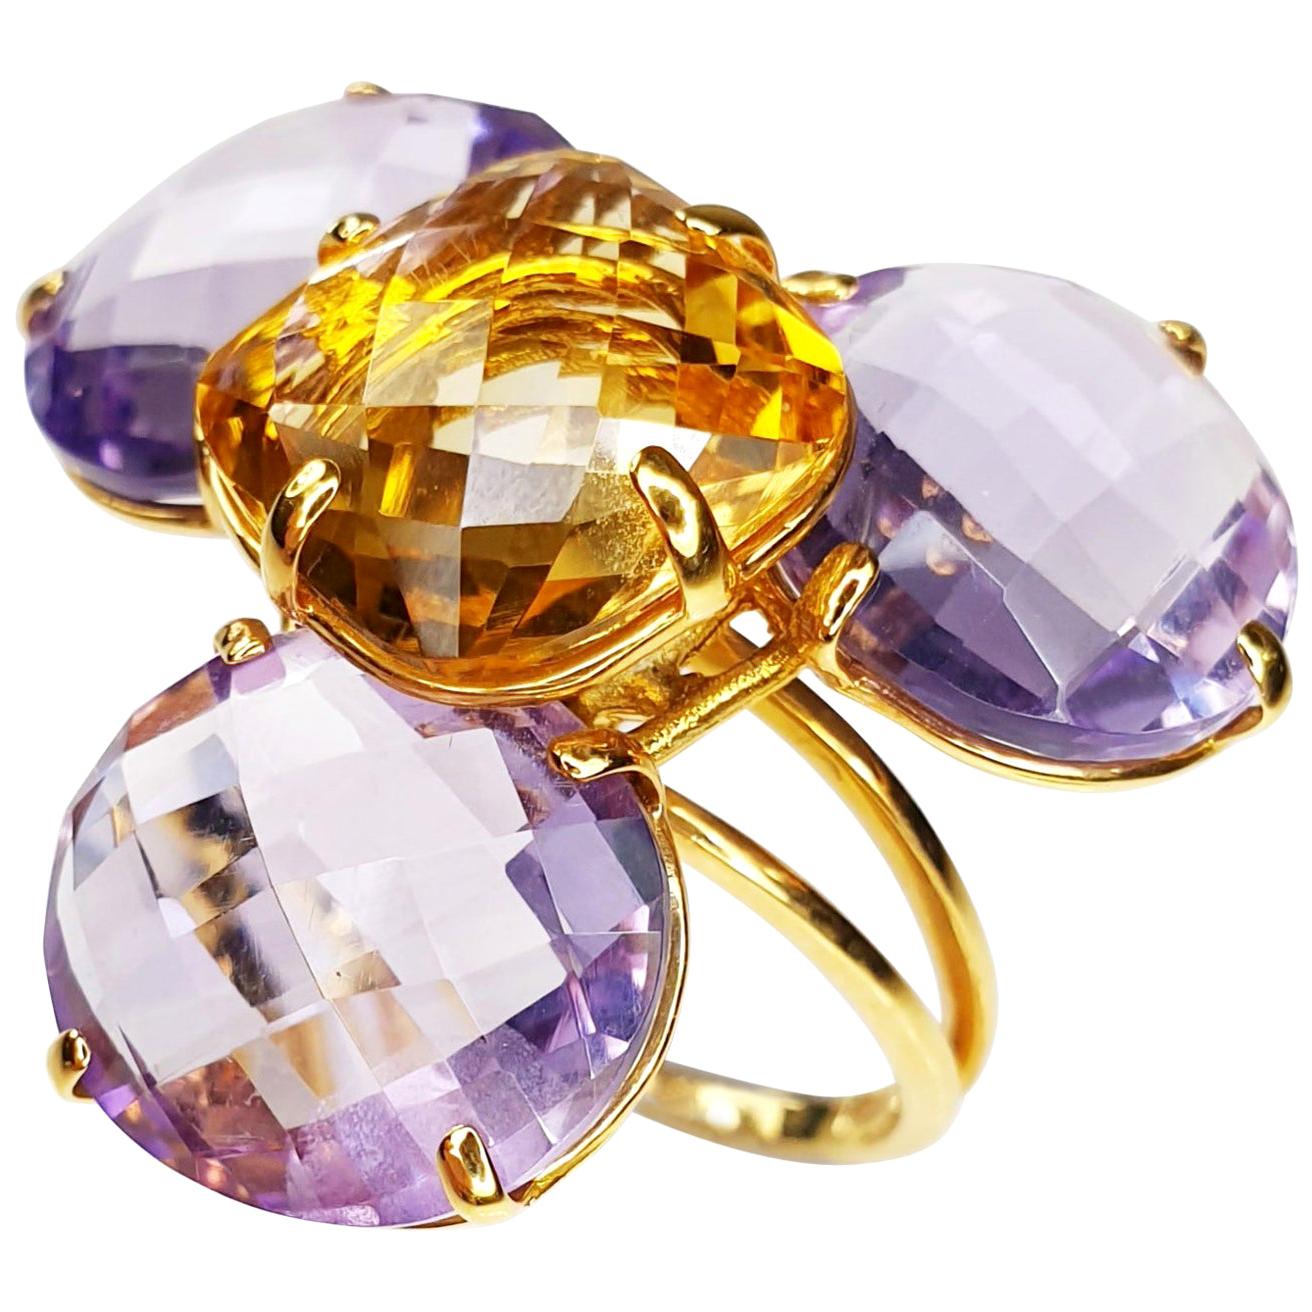 Multiphaceted Flower Ring with Central Citrine and Three Amethysts